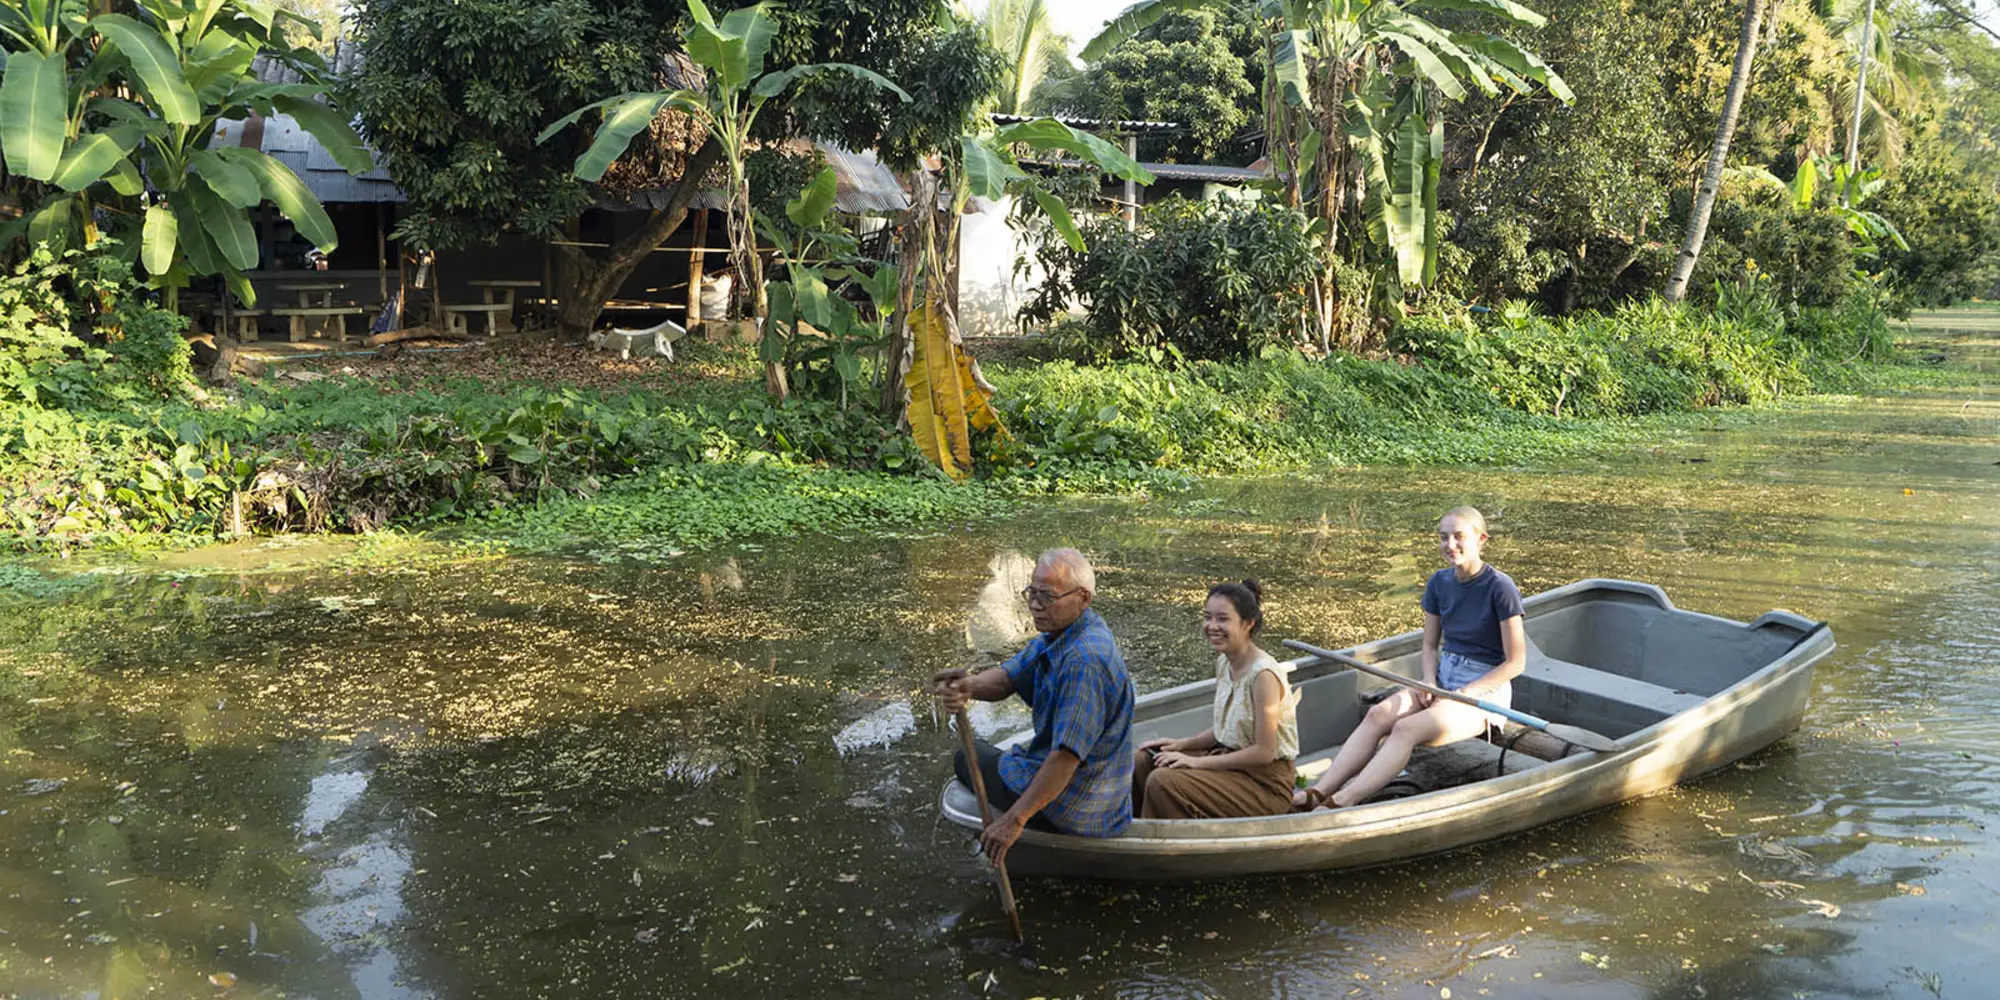 three people in boat on canal passing village